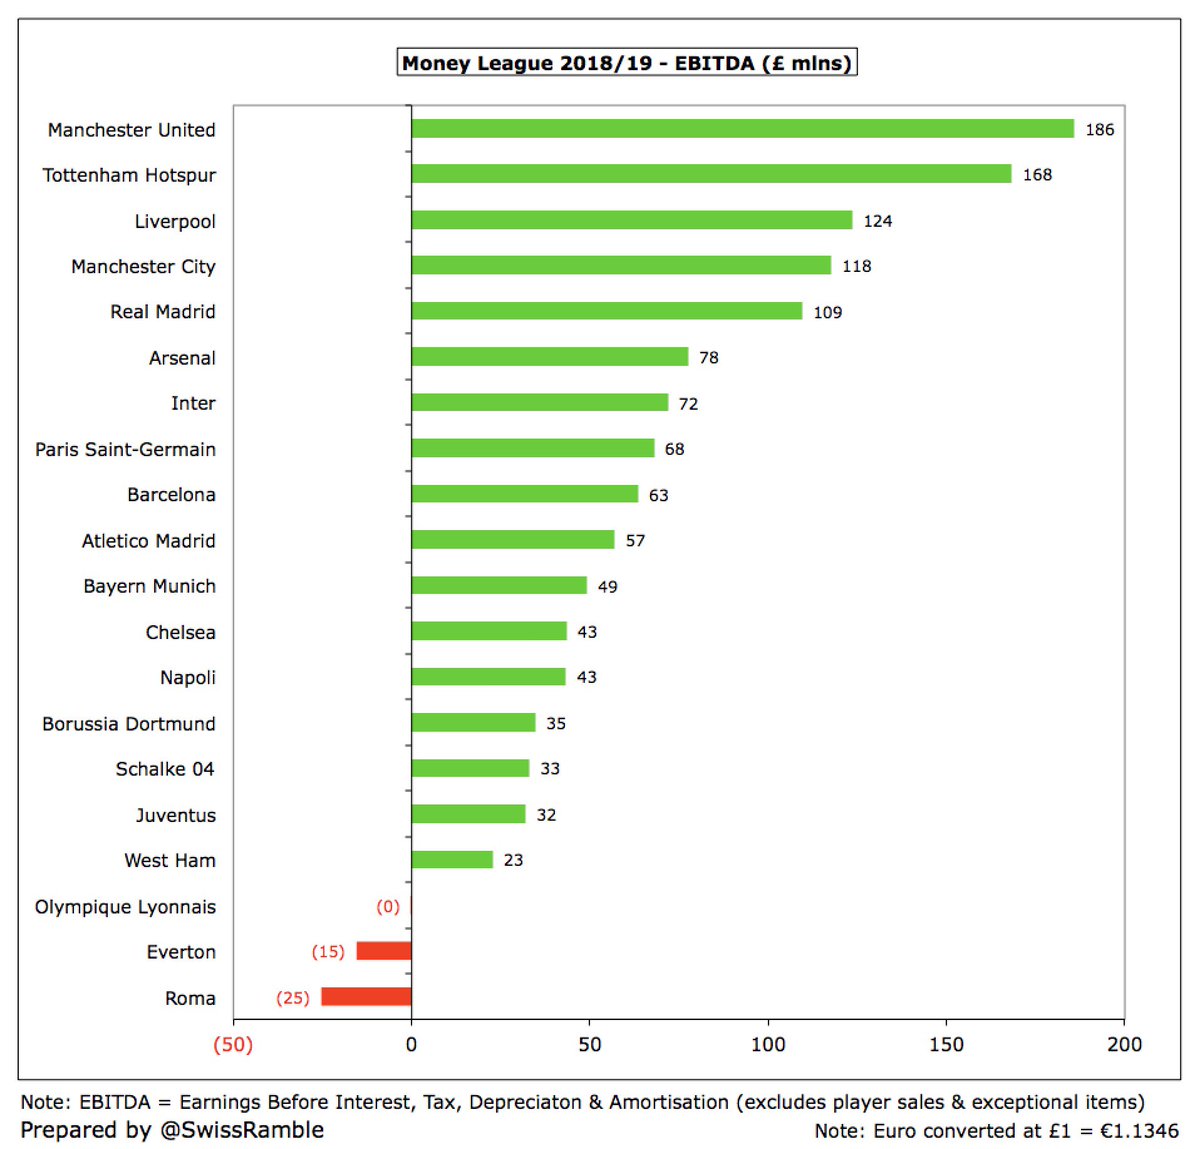 Almost all clubs are profitable in terms of EBITDA (Earnings Before Interest, Taxation, Depreciation and Amortisation) with 4 English clubs generating the most:  #MUFC £186m,  #THFC £168m,  #LFC £124m and  #MCFC £118m. The only negatives were  #ASRoma £25m,  #EFC £15m and  #TeamOL £4k.